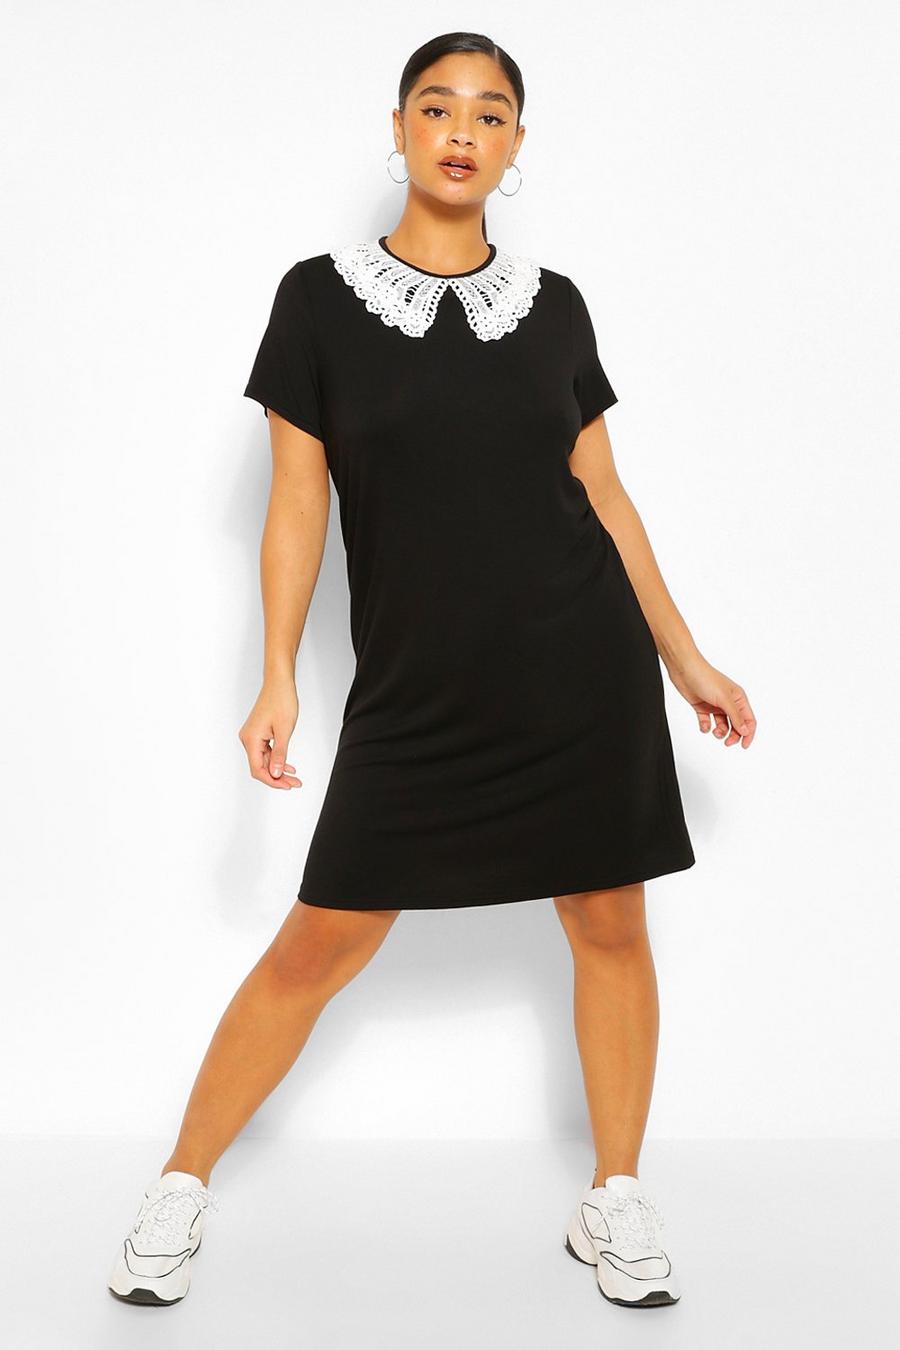 ASOS Knit Dress with Lace Collar in Black